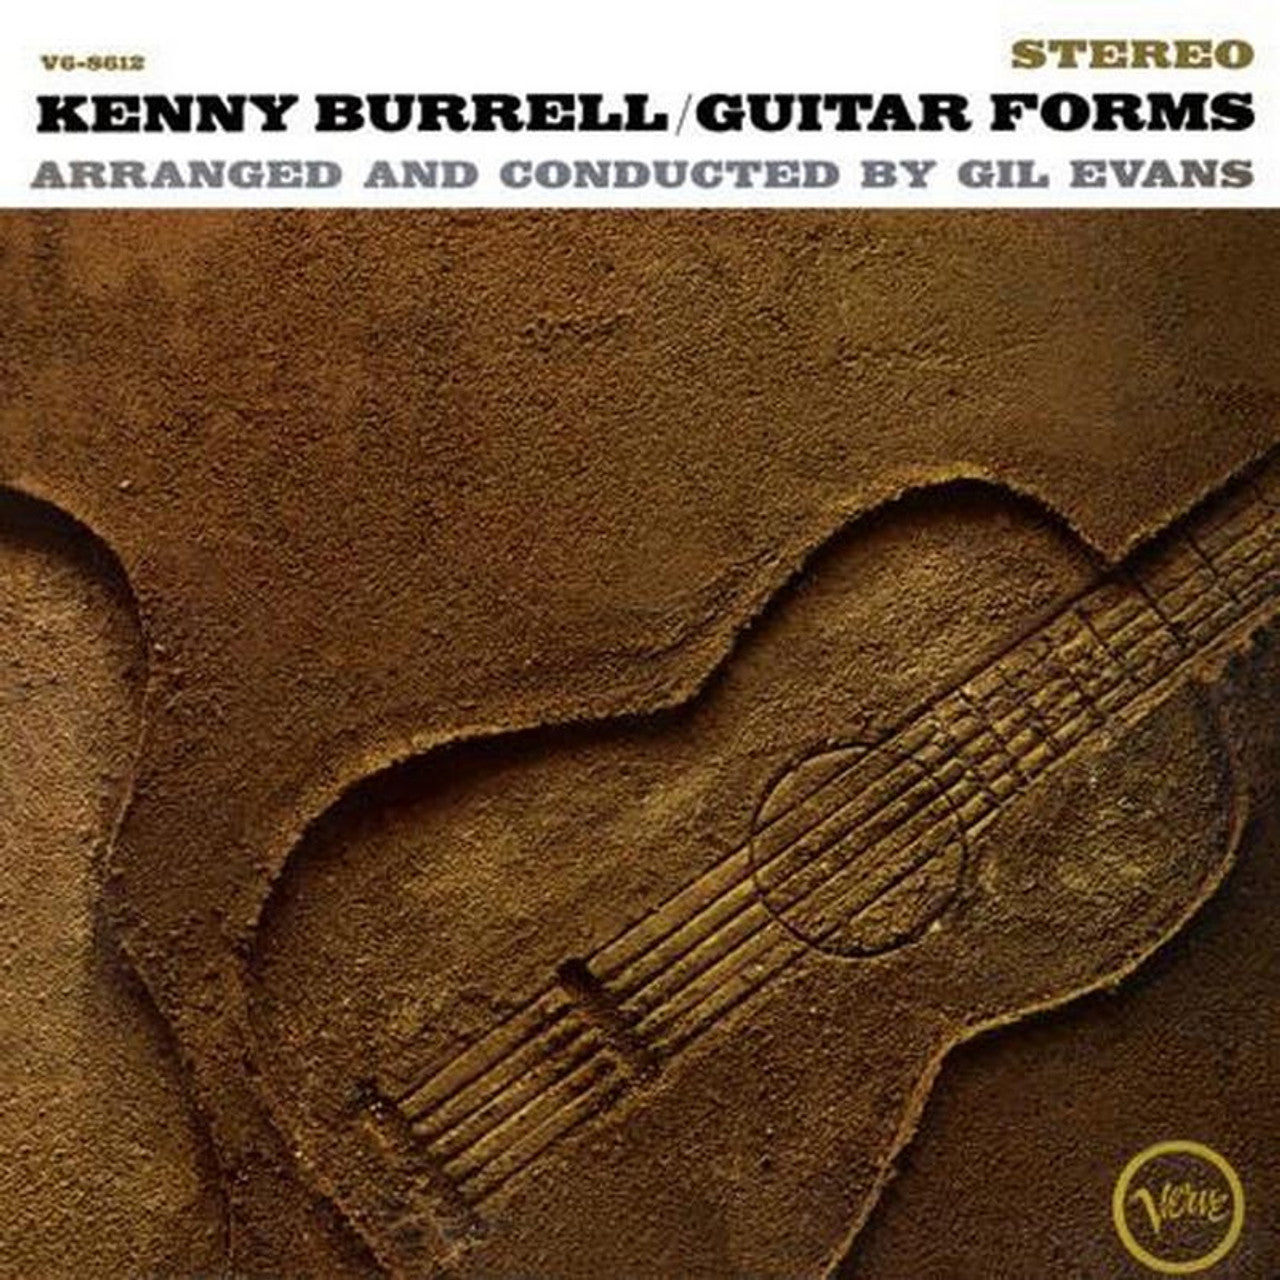 (Pre Order) Kenny Burrell - Guitar Forms - Acoustic Sounds Series LP